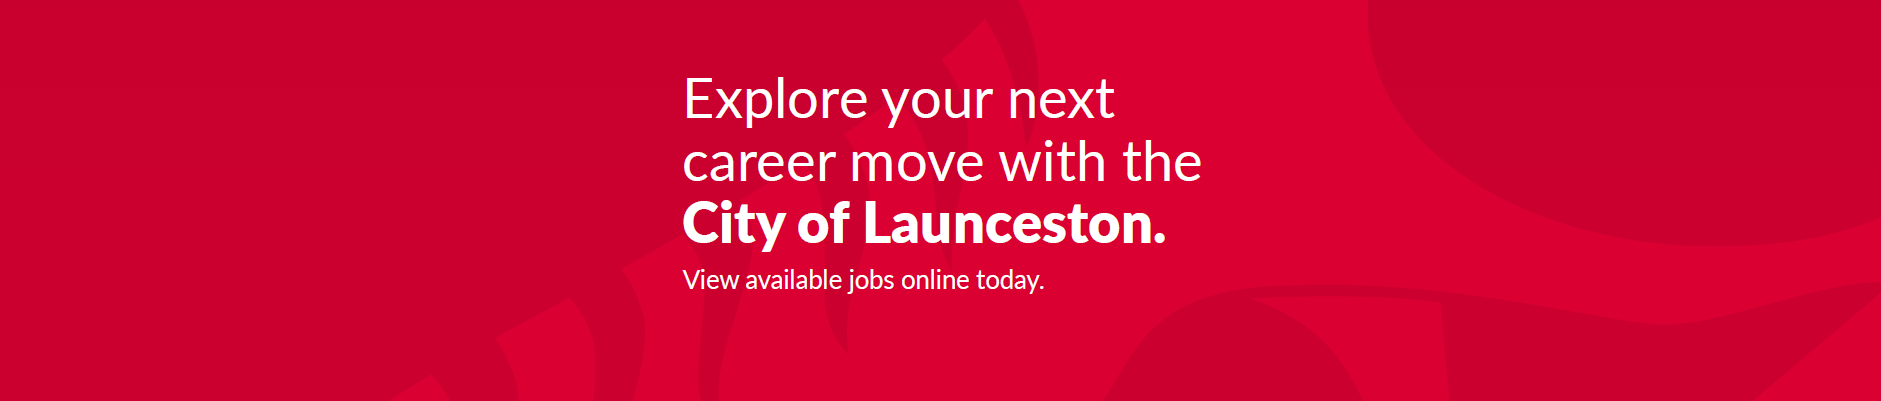 careers-with-the-city-of-launceston_2.png